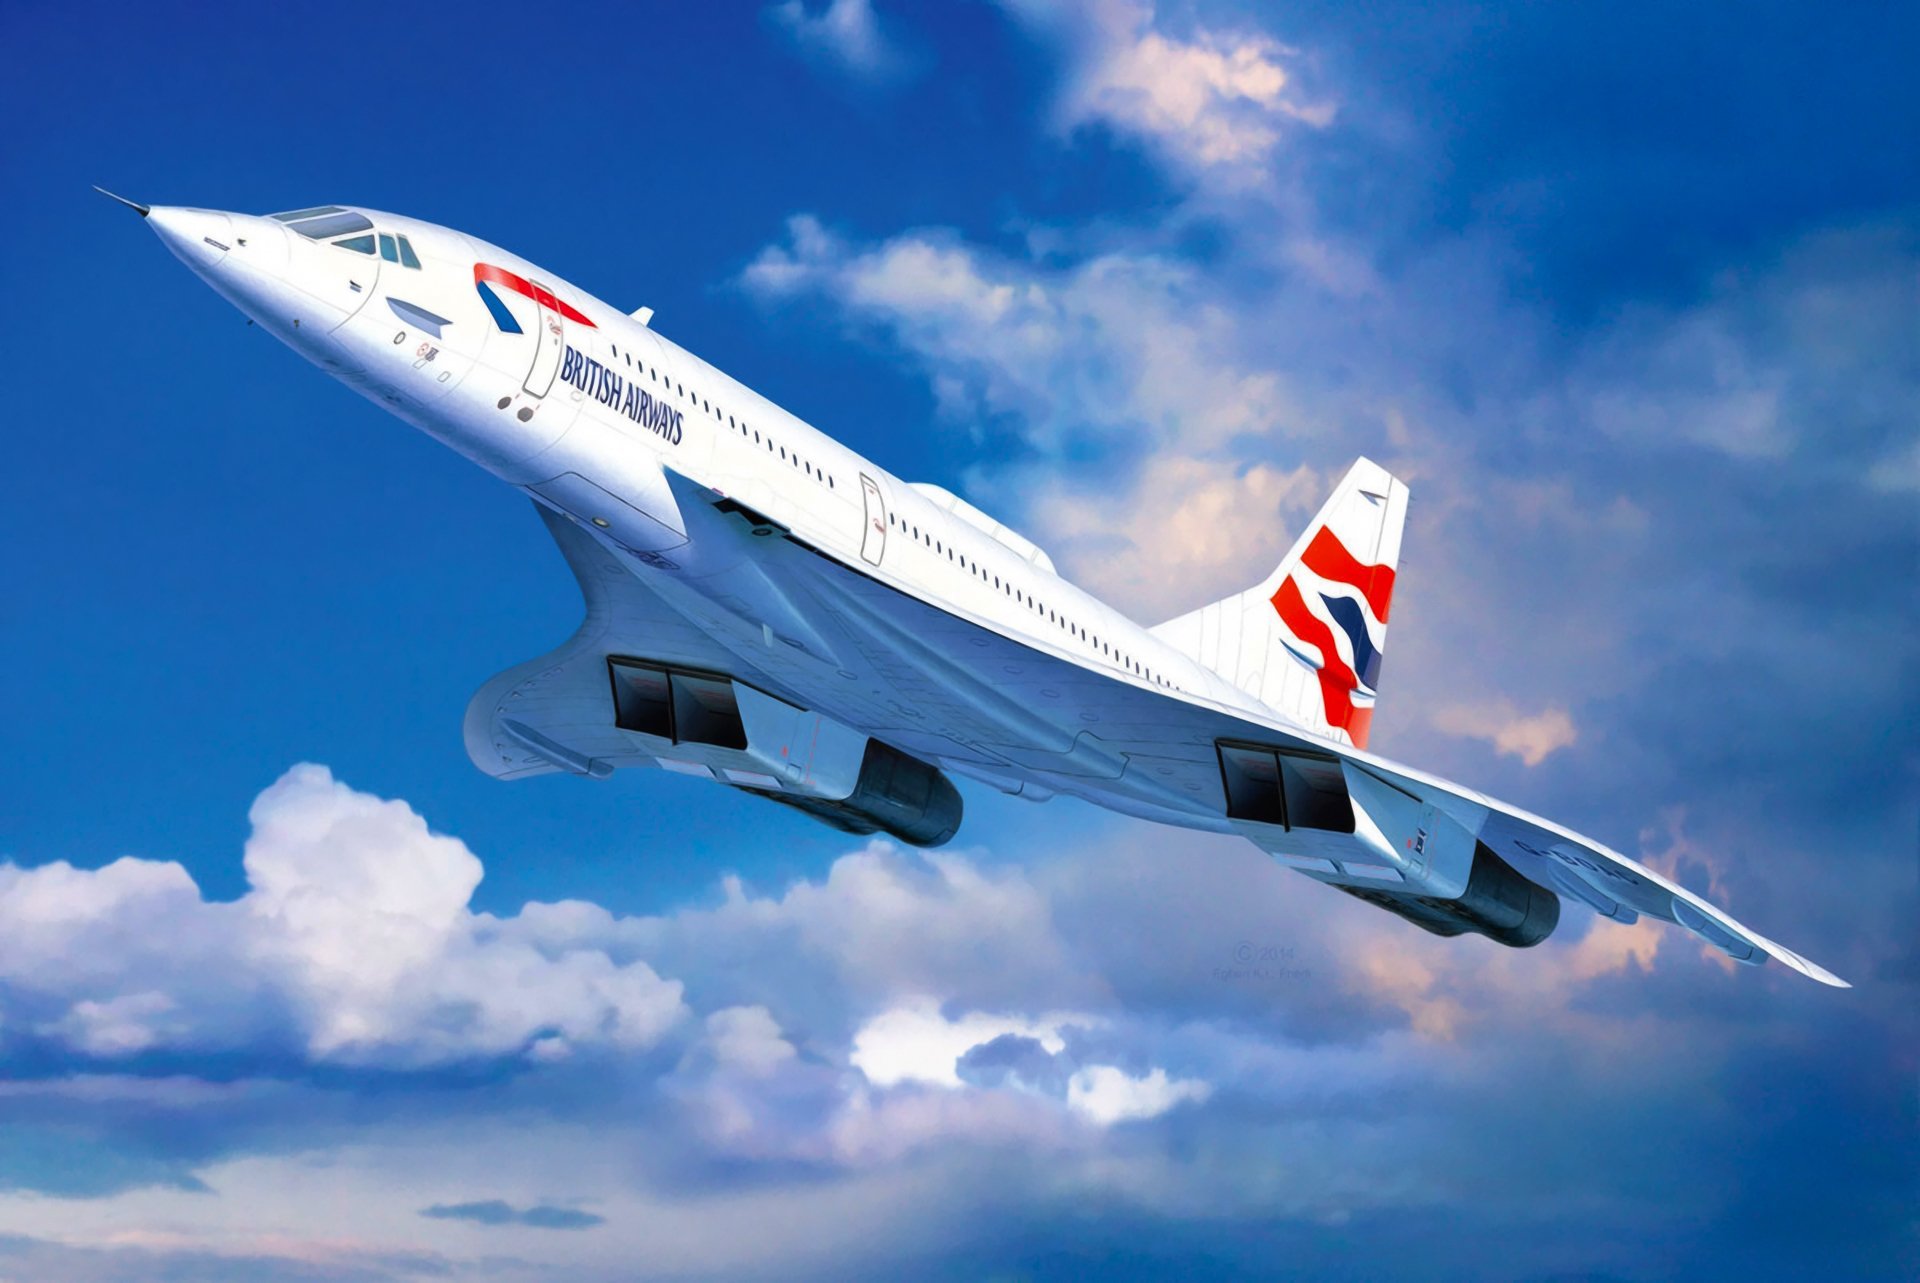 Download To Your Desktop Background - Revell Concorde 1 72 - HD Wallpaper 